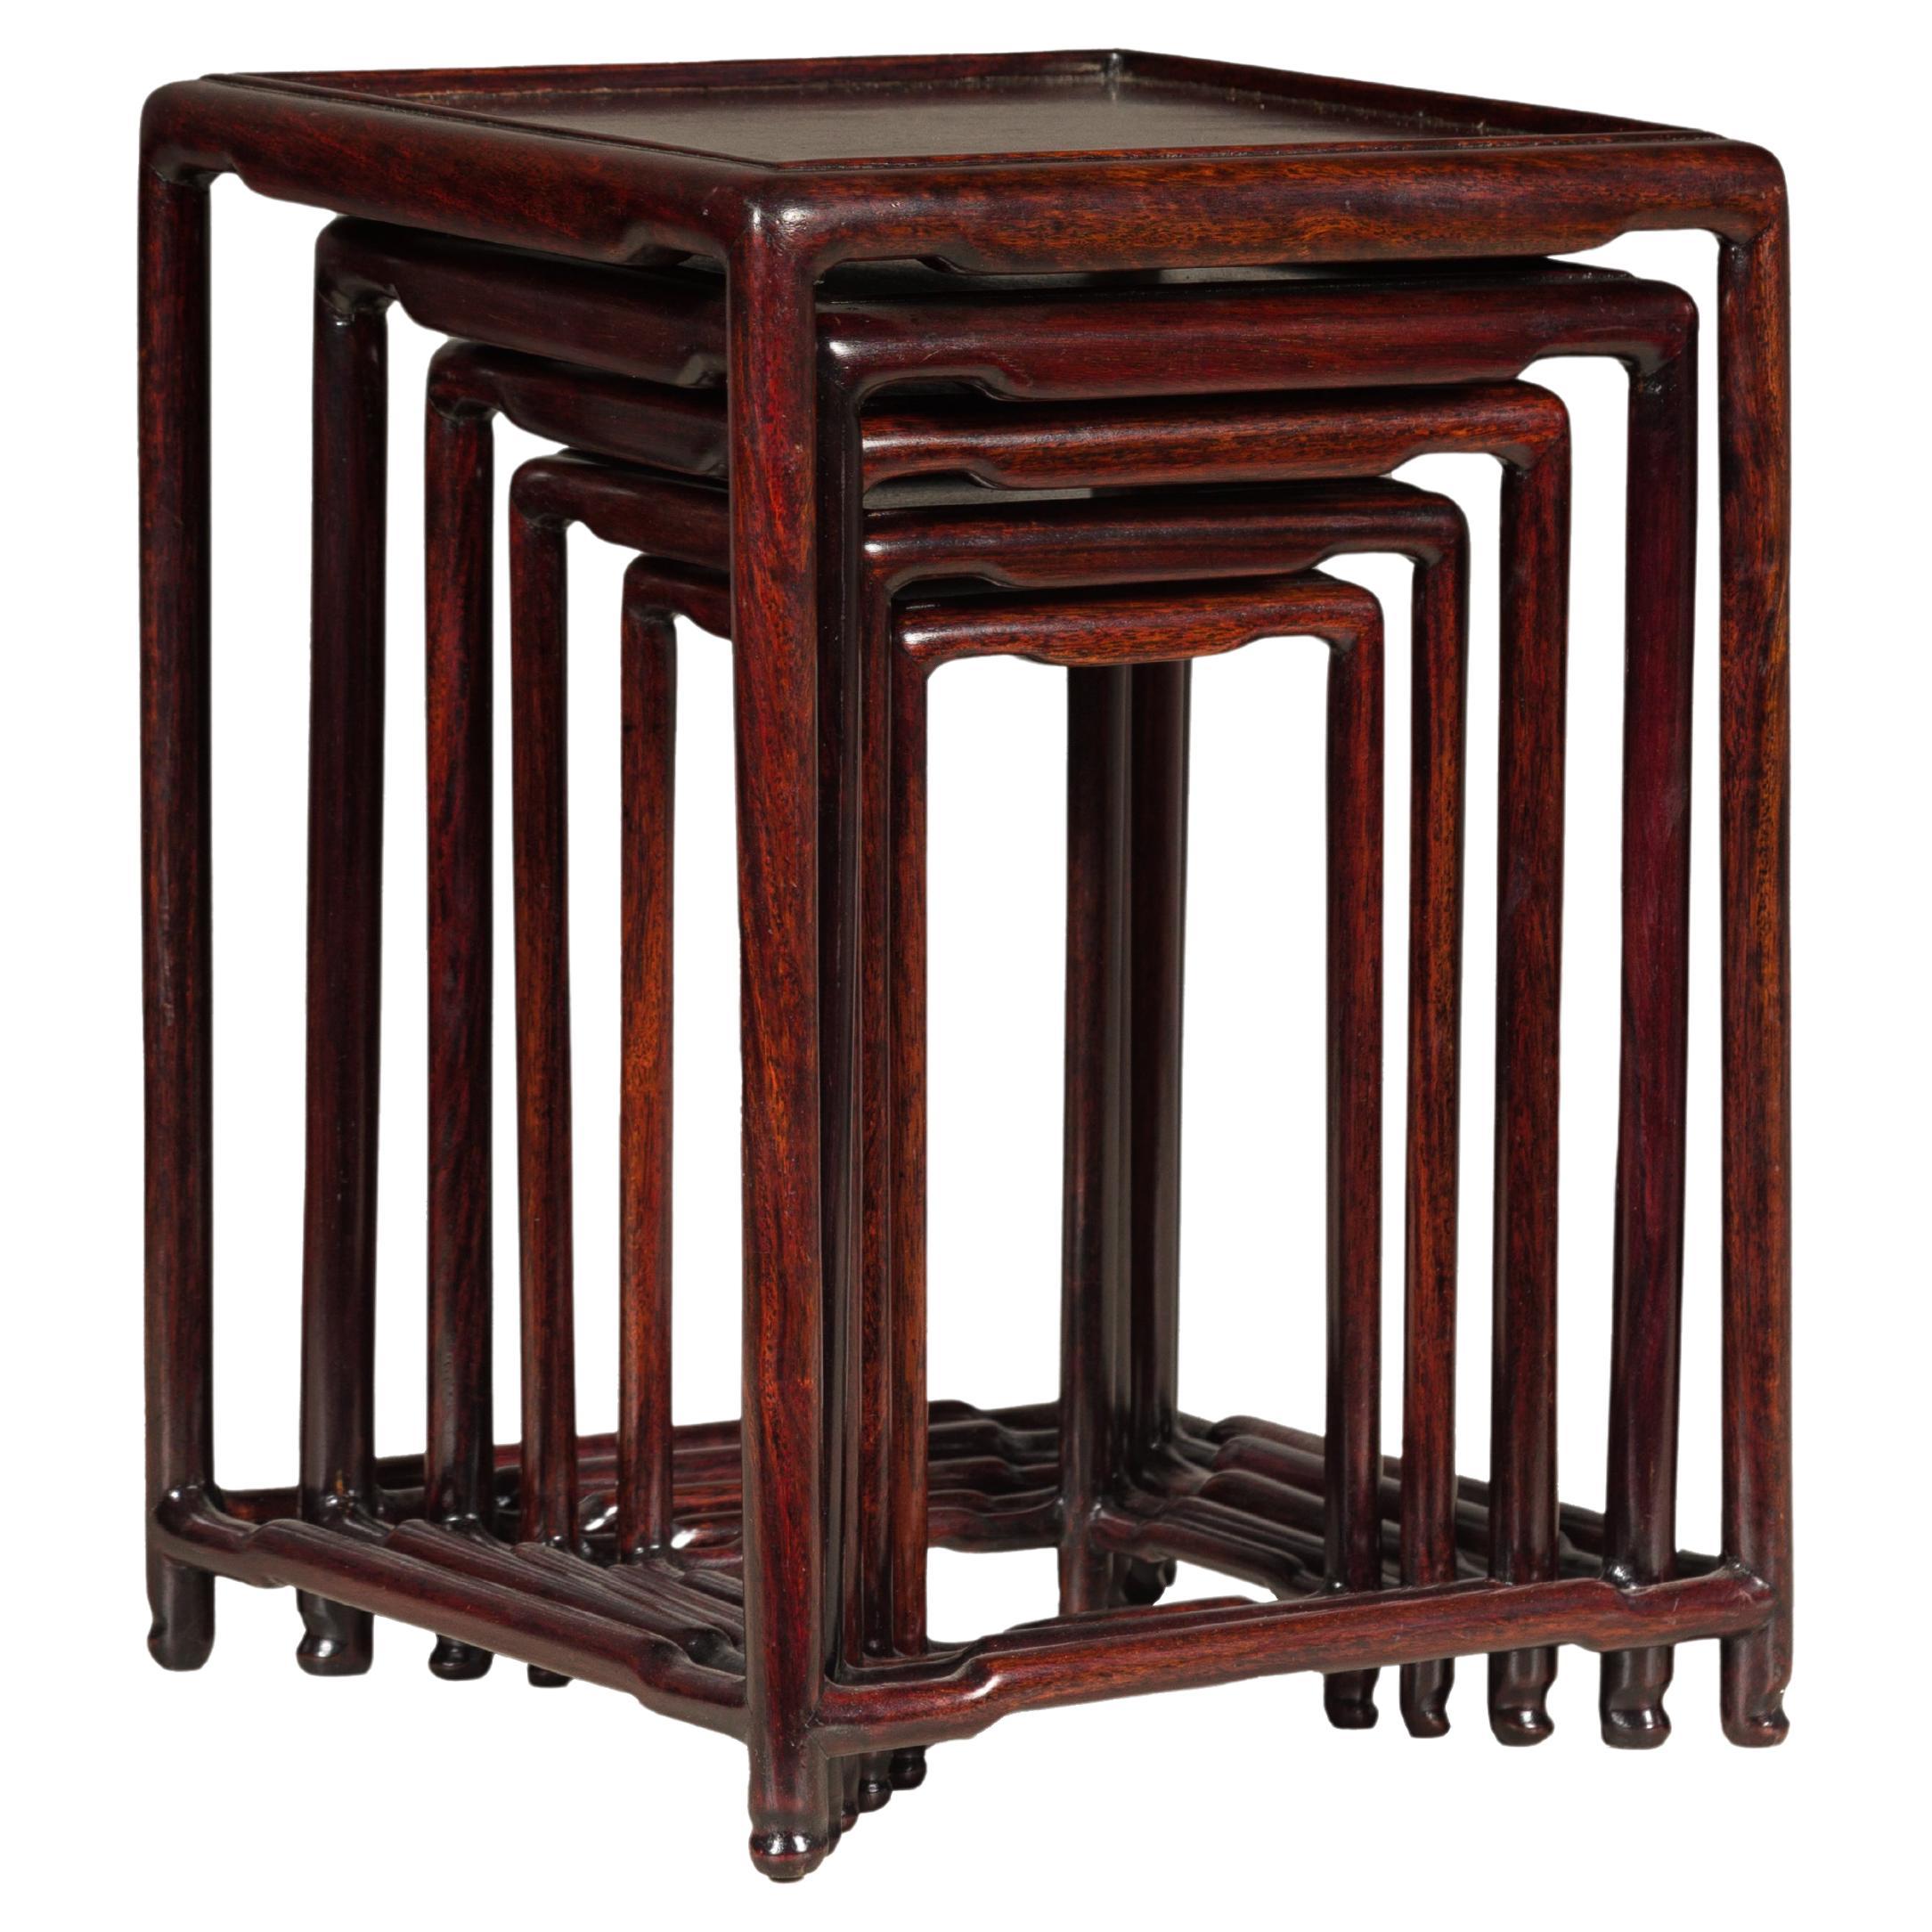 Set of Five Small Size Rosewood Nesting Tables with Humpback Stretchers For Sale